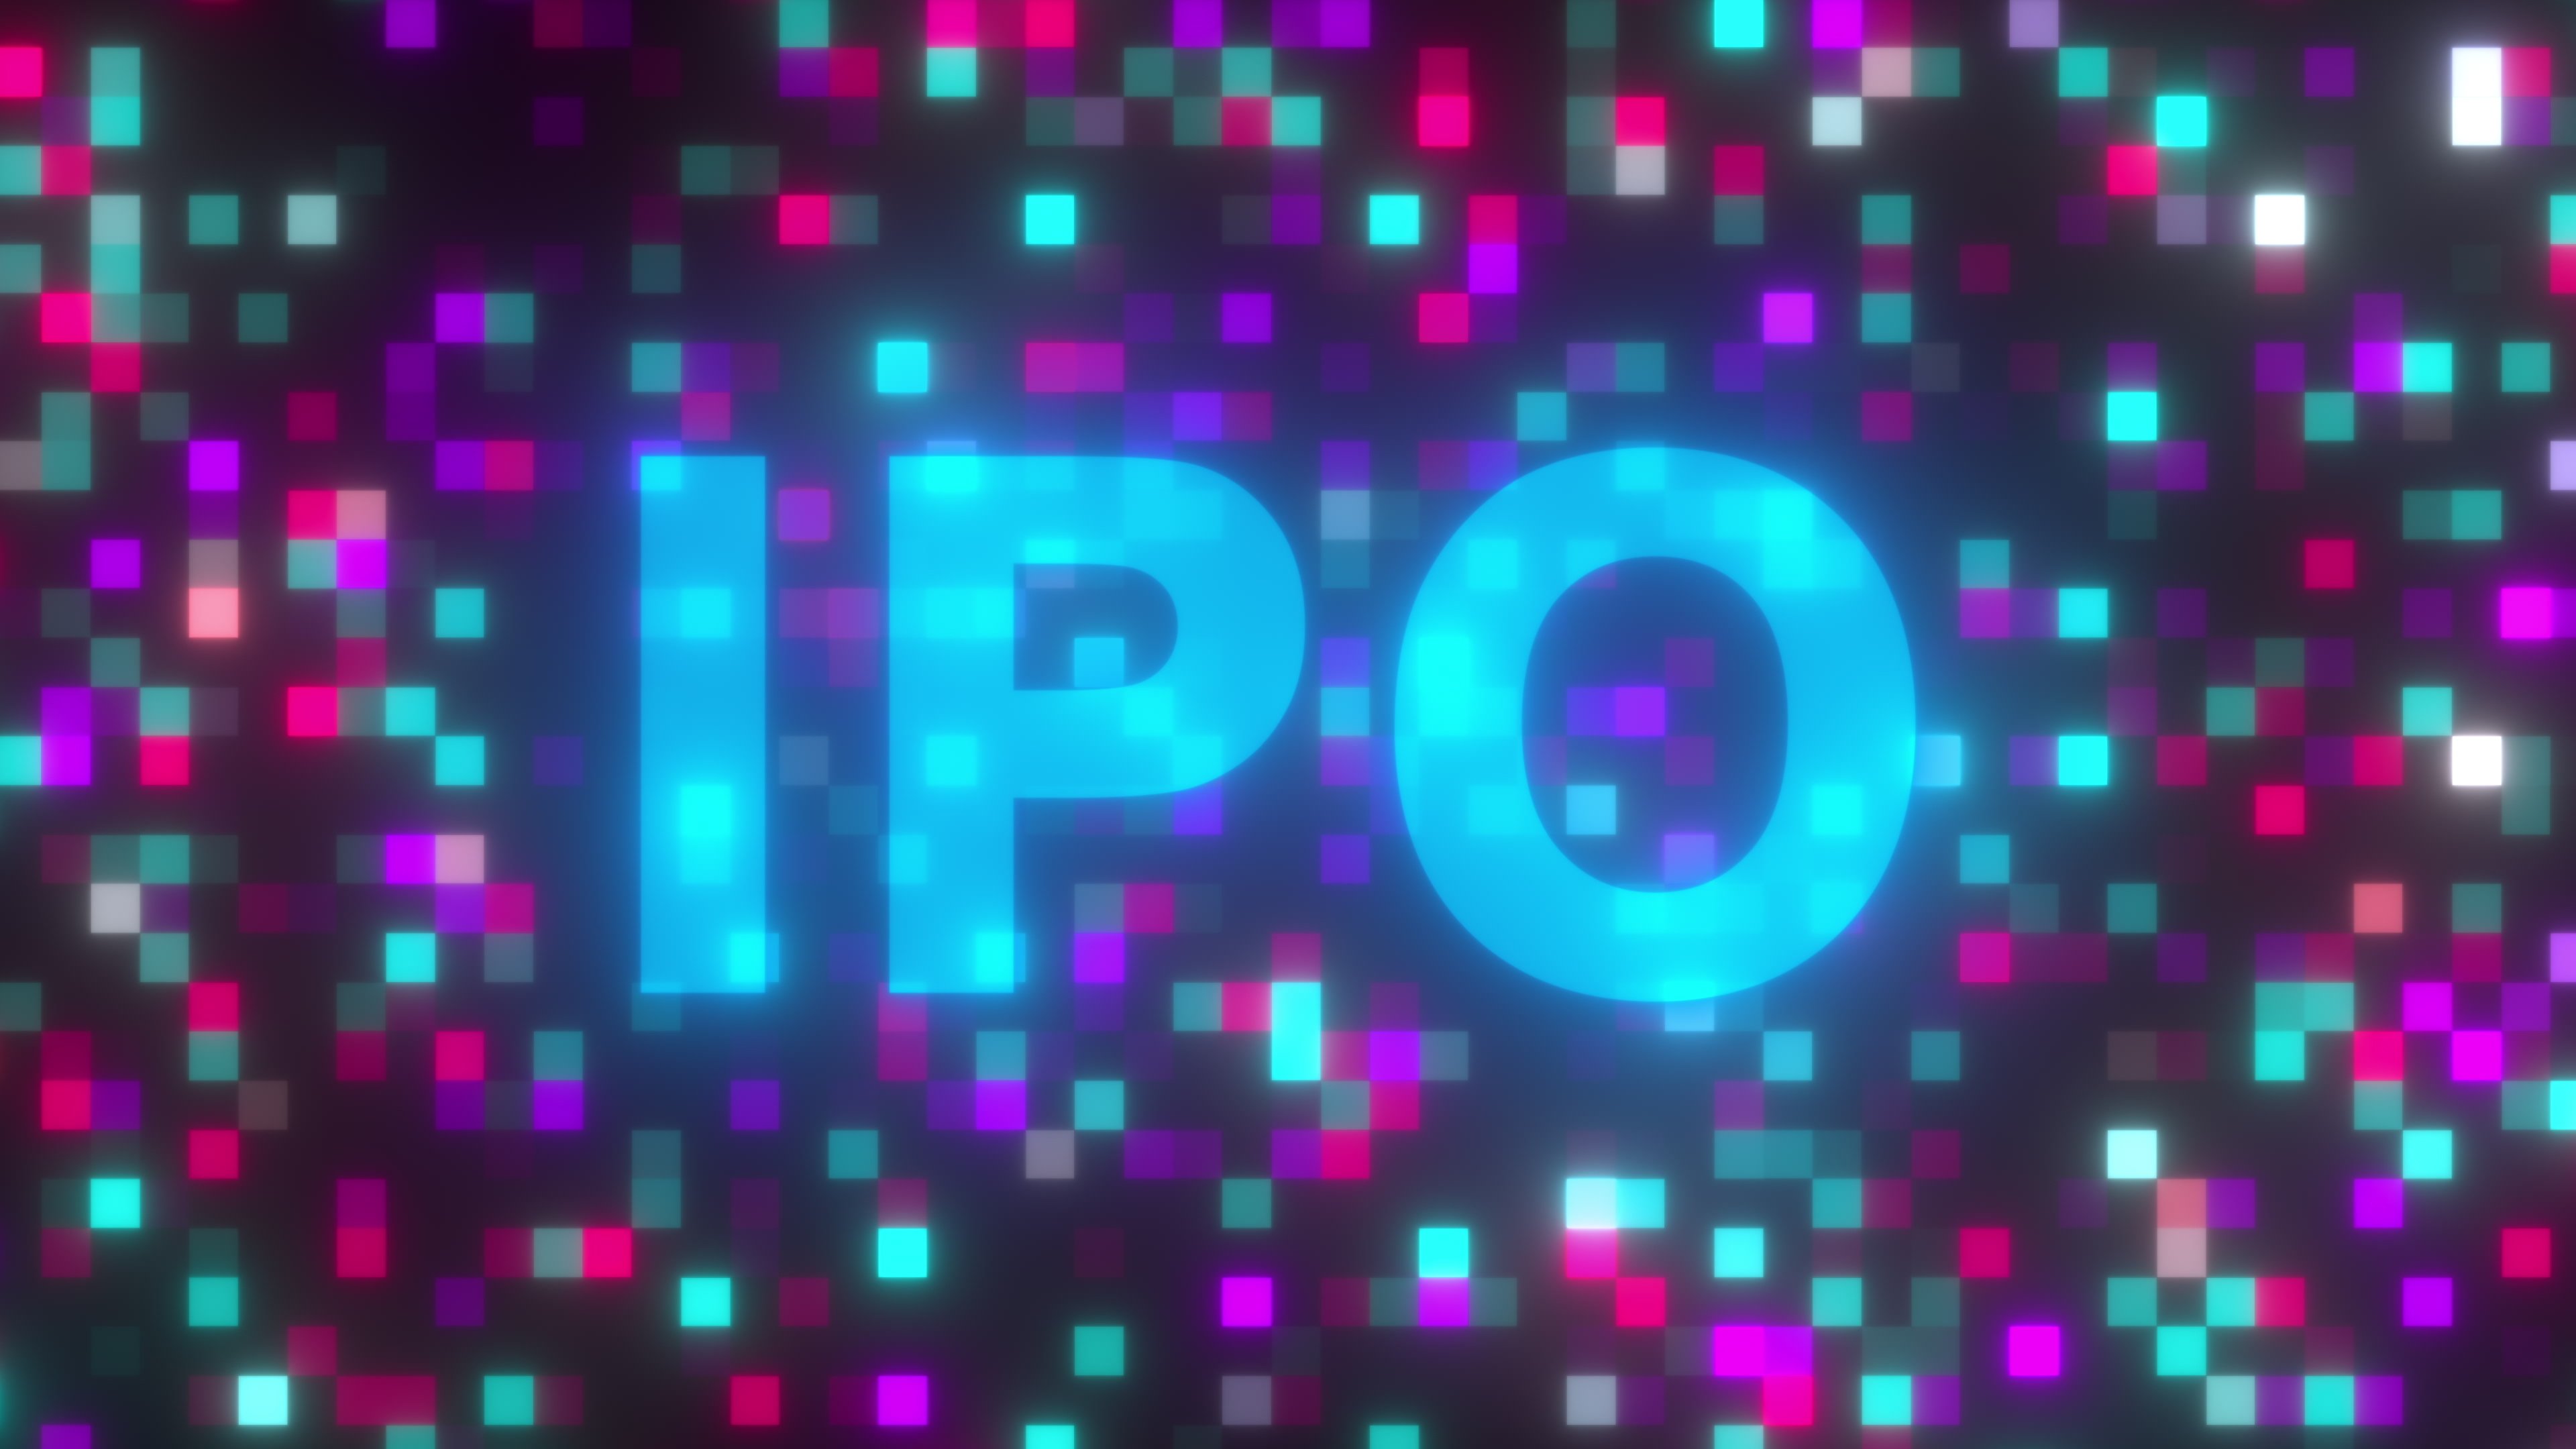 IPO initial public offering Wall Street